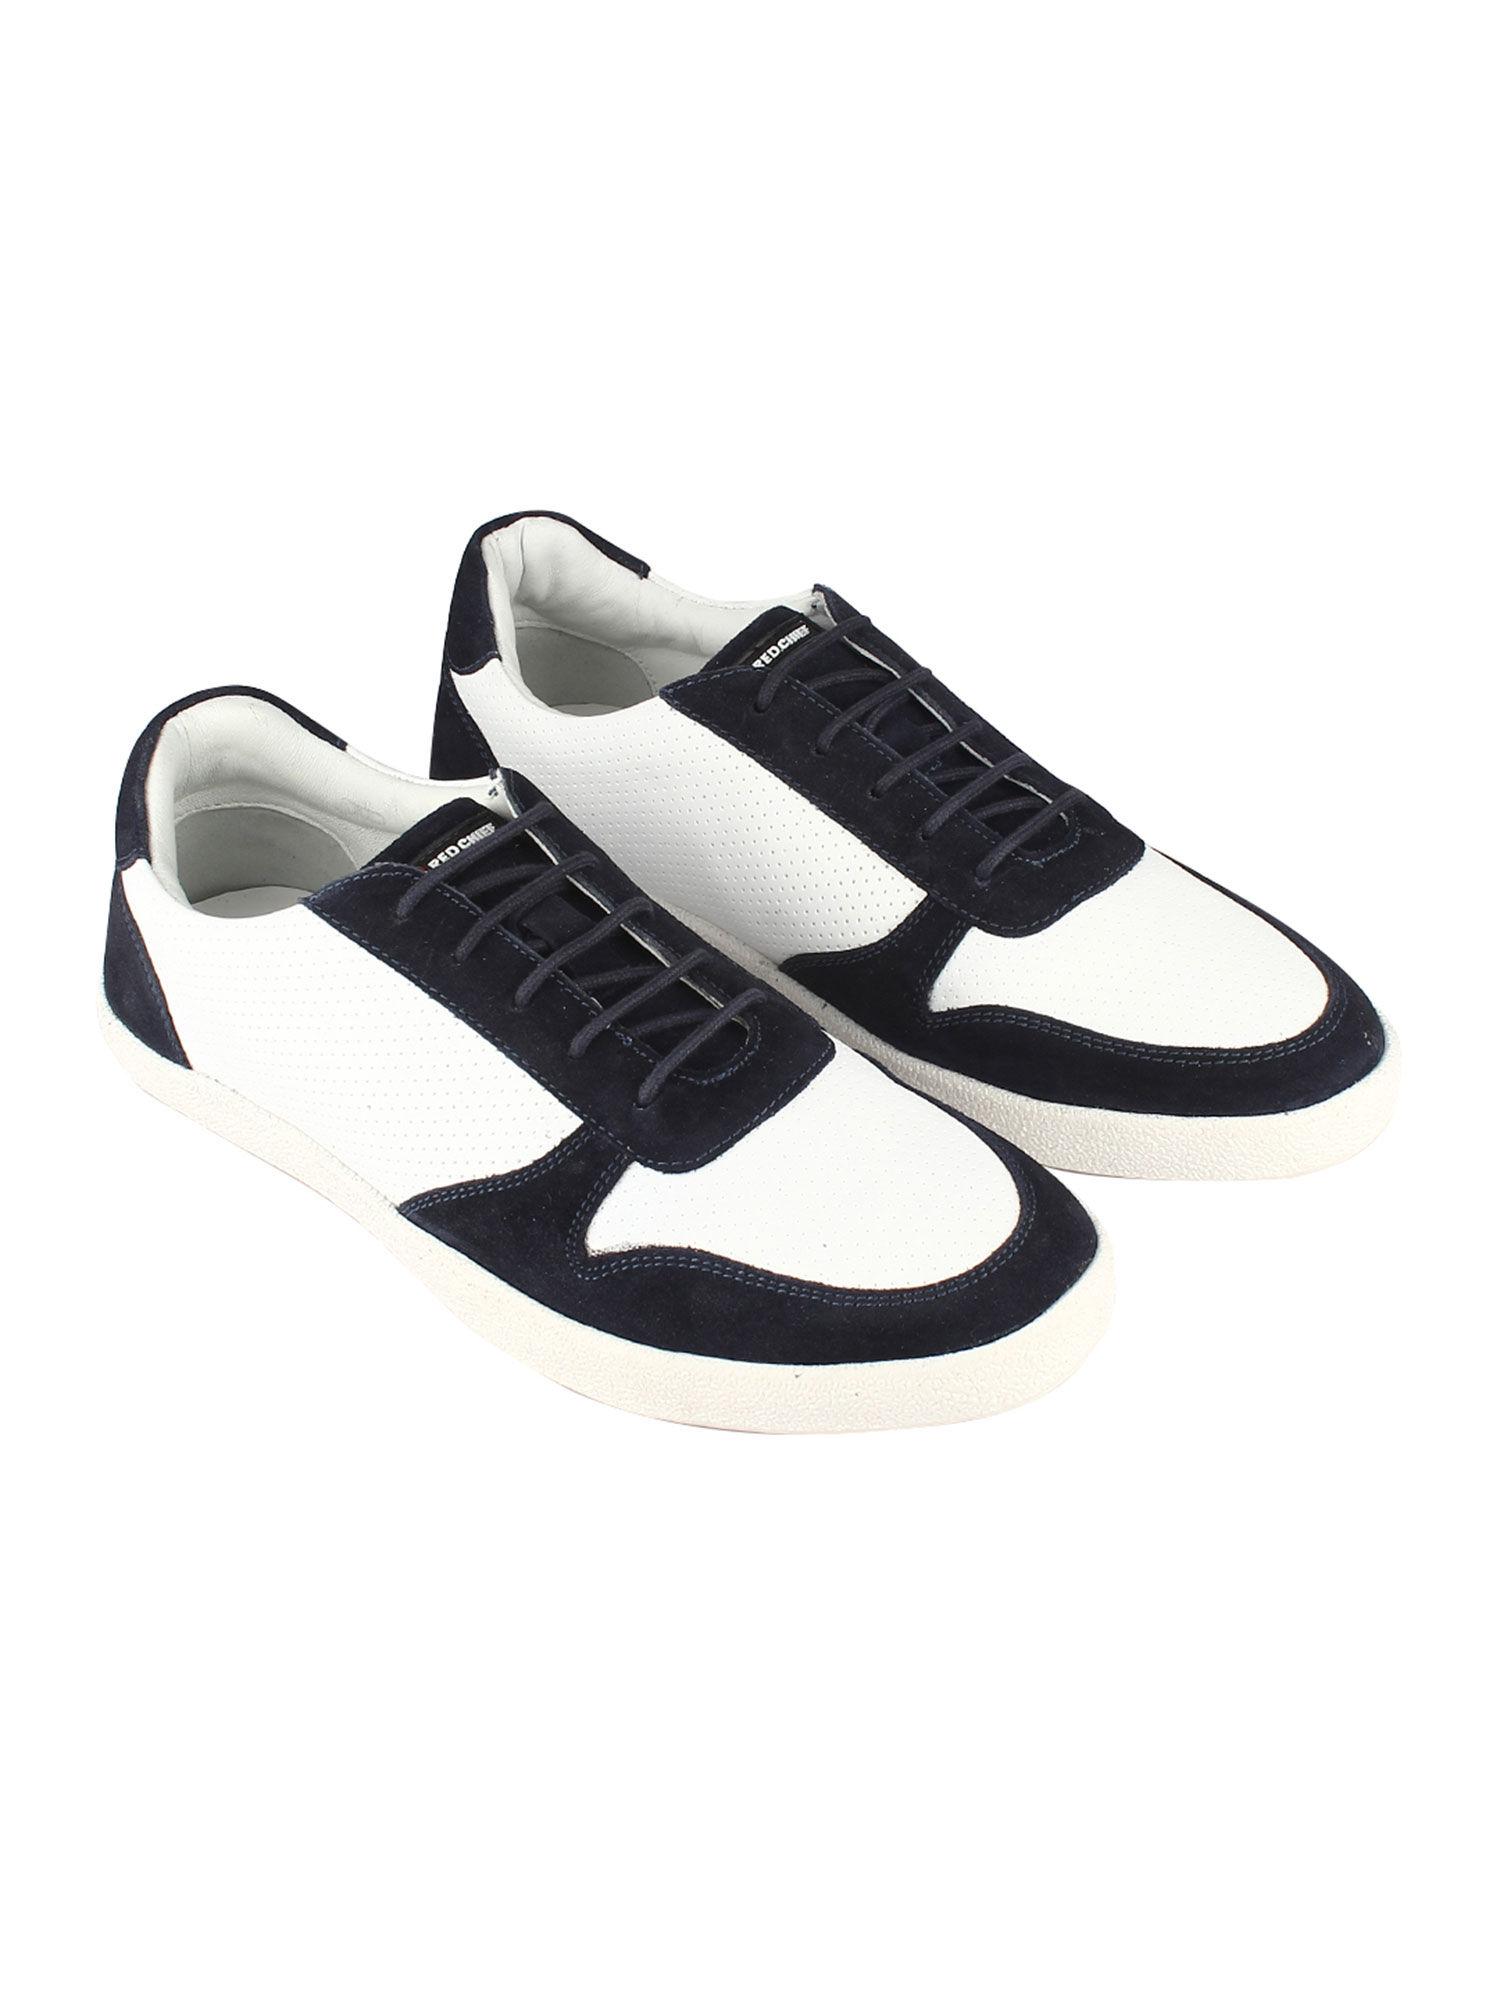 white sneakers leather casual shoes